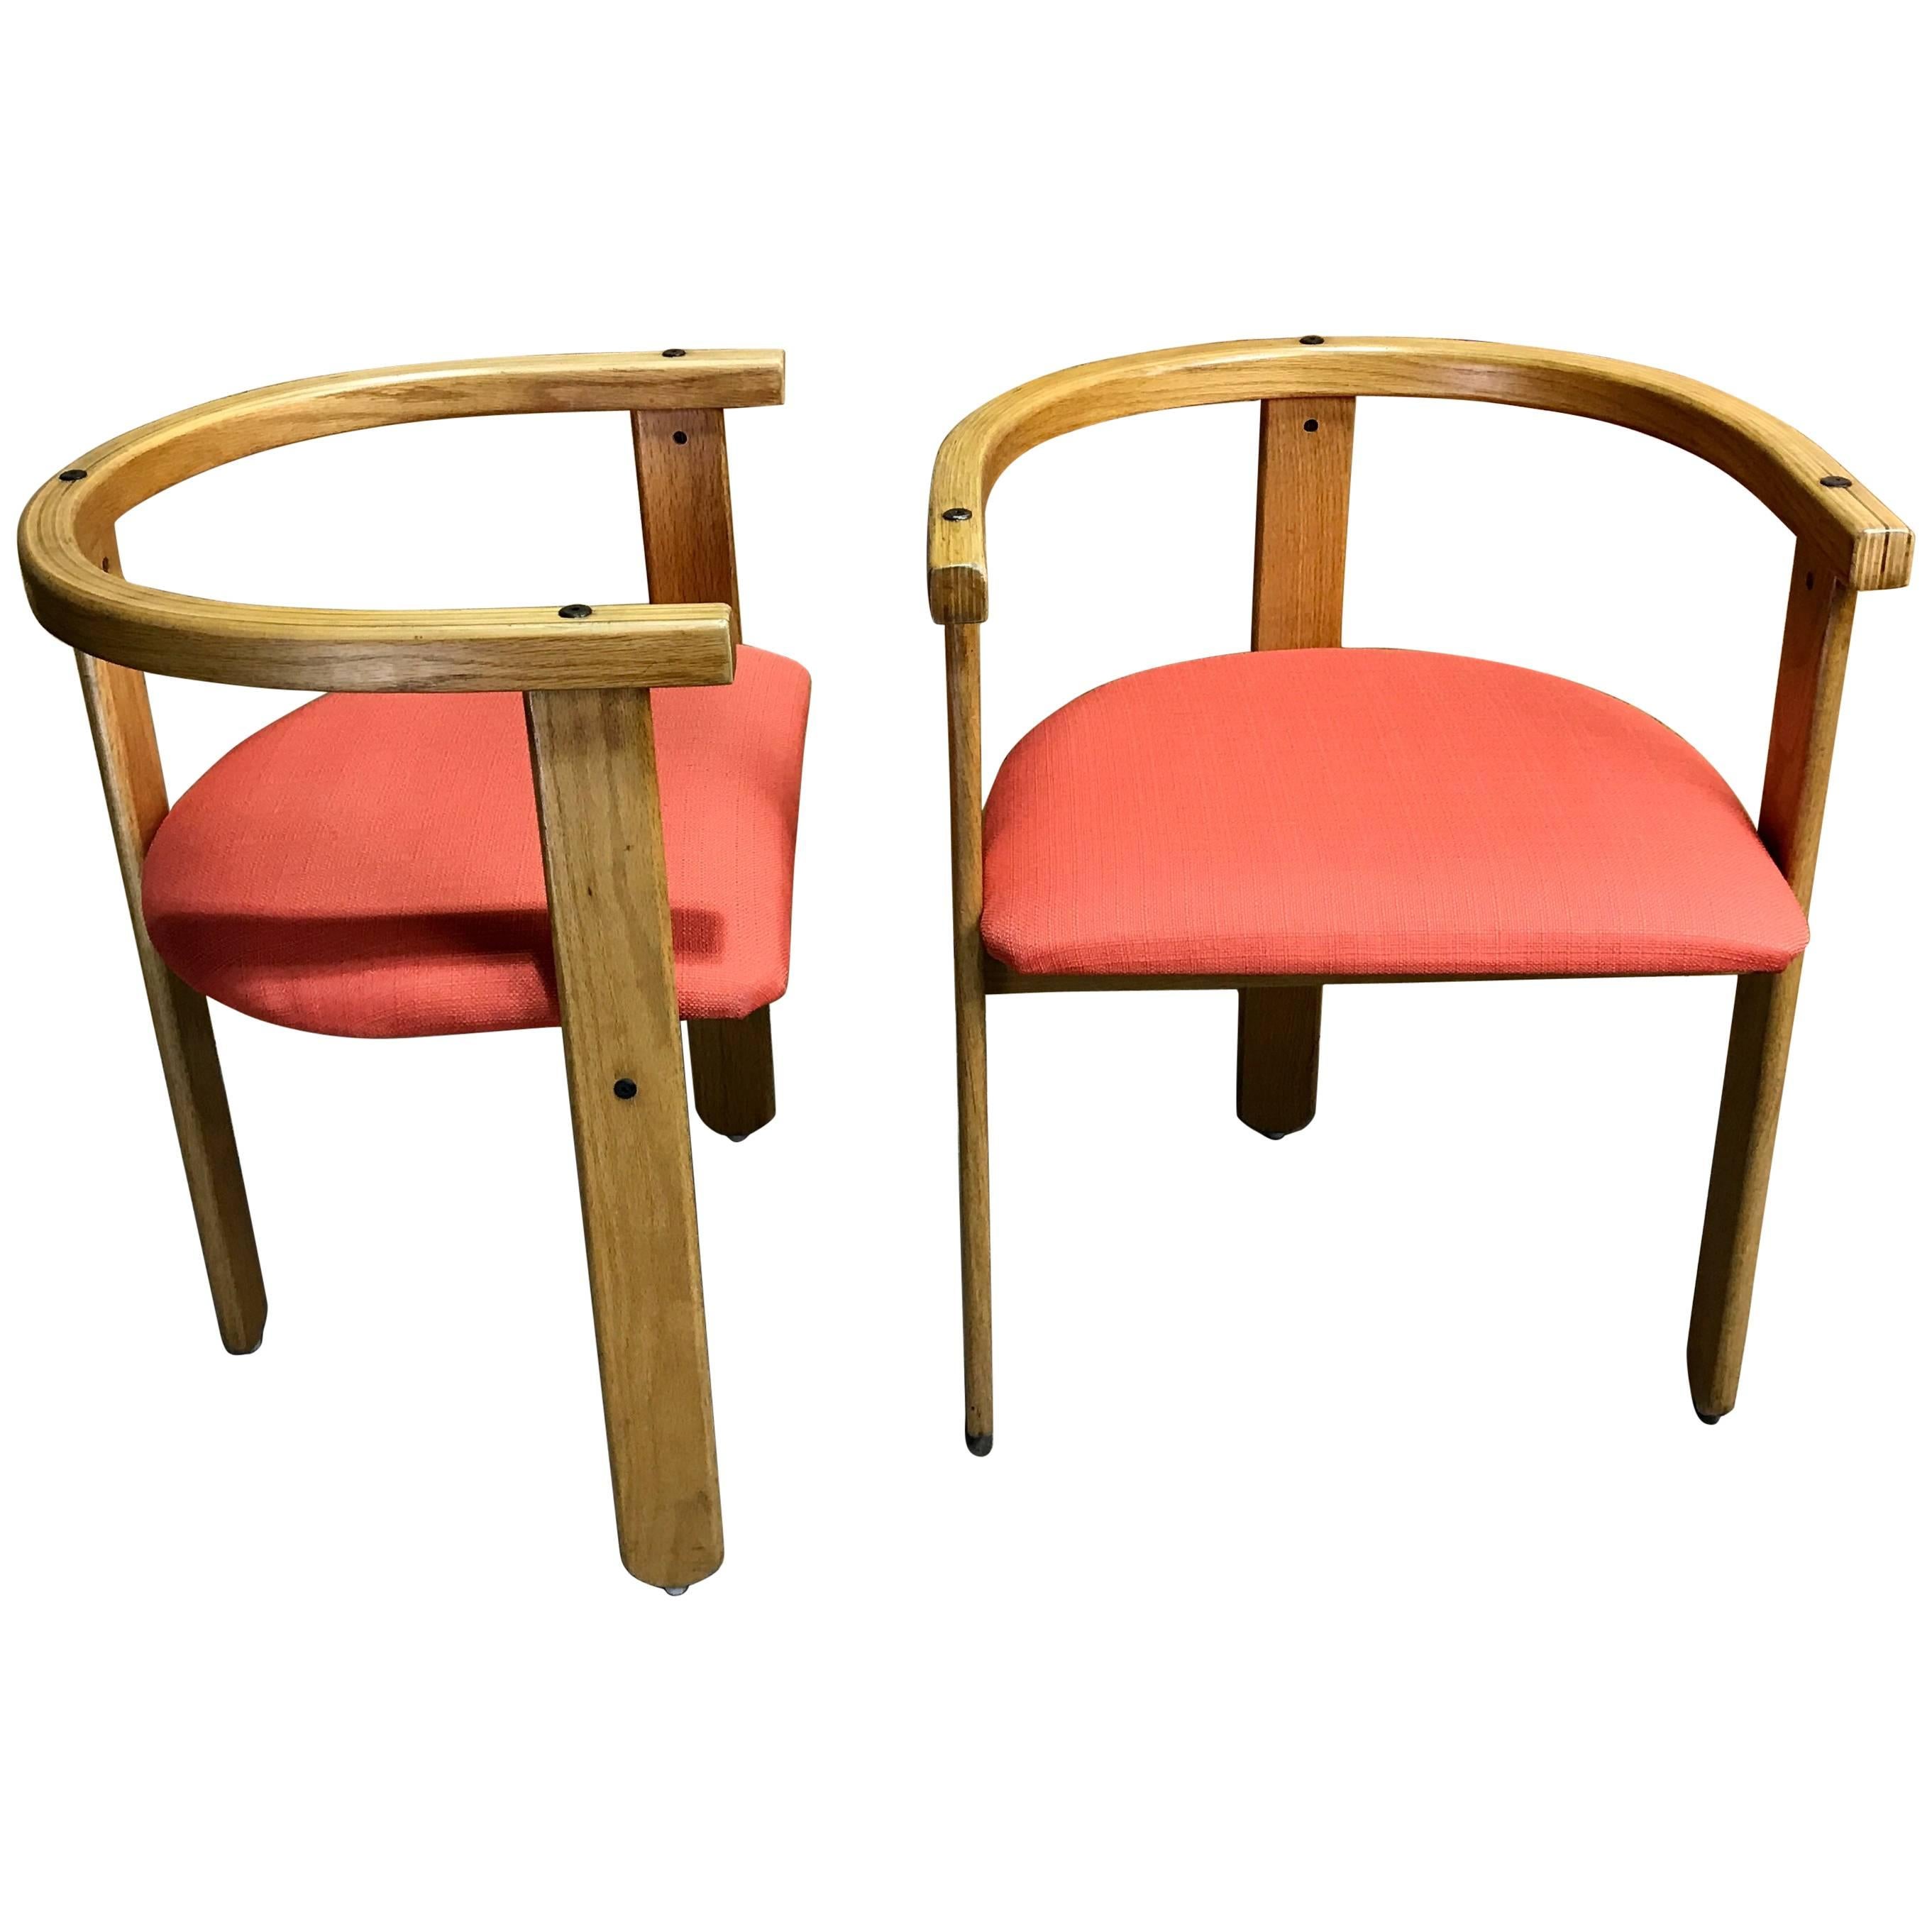 Pair of Pop Art "Popsicle" Chairs by Dan Droz